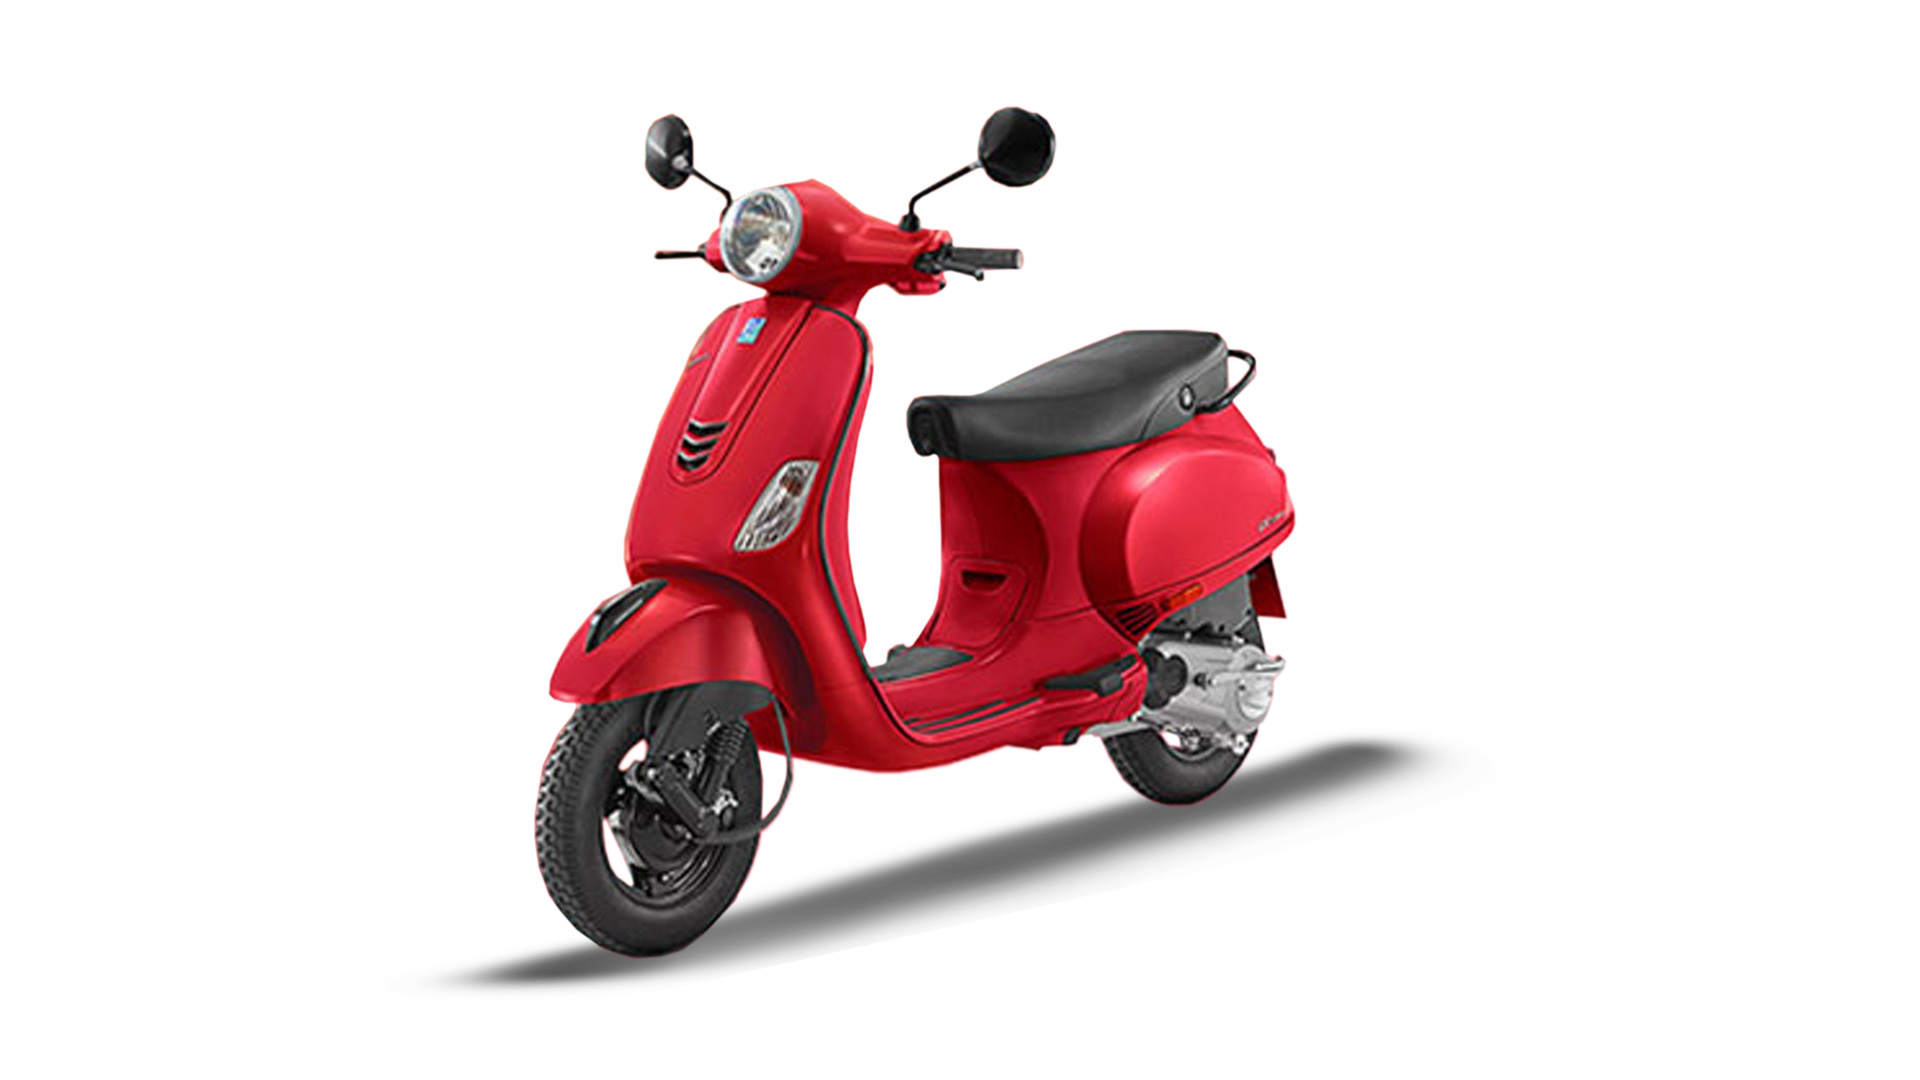 Vespa Urban Club 2019 STD - Price, Mileage, Reviews, Specification, Gallery - Overdrive